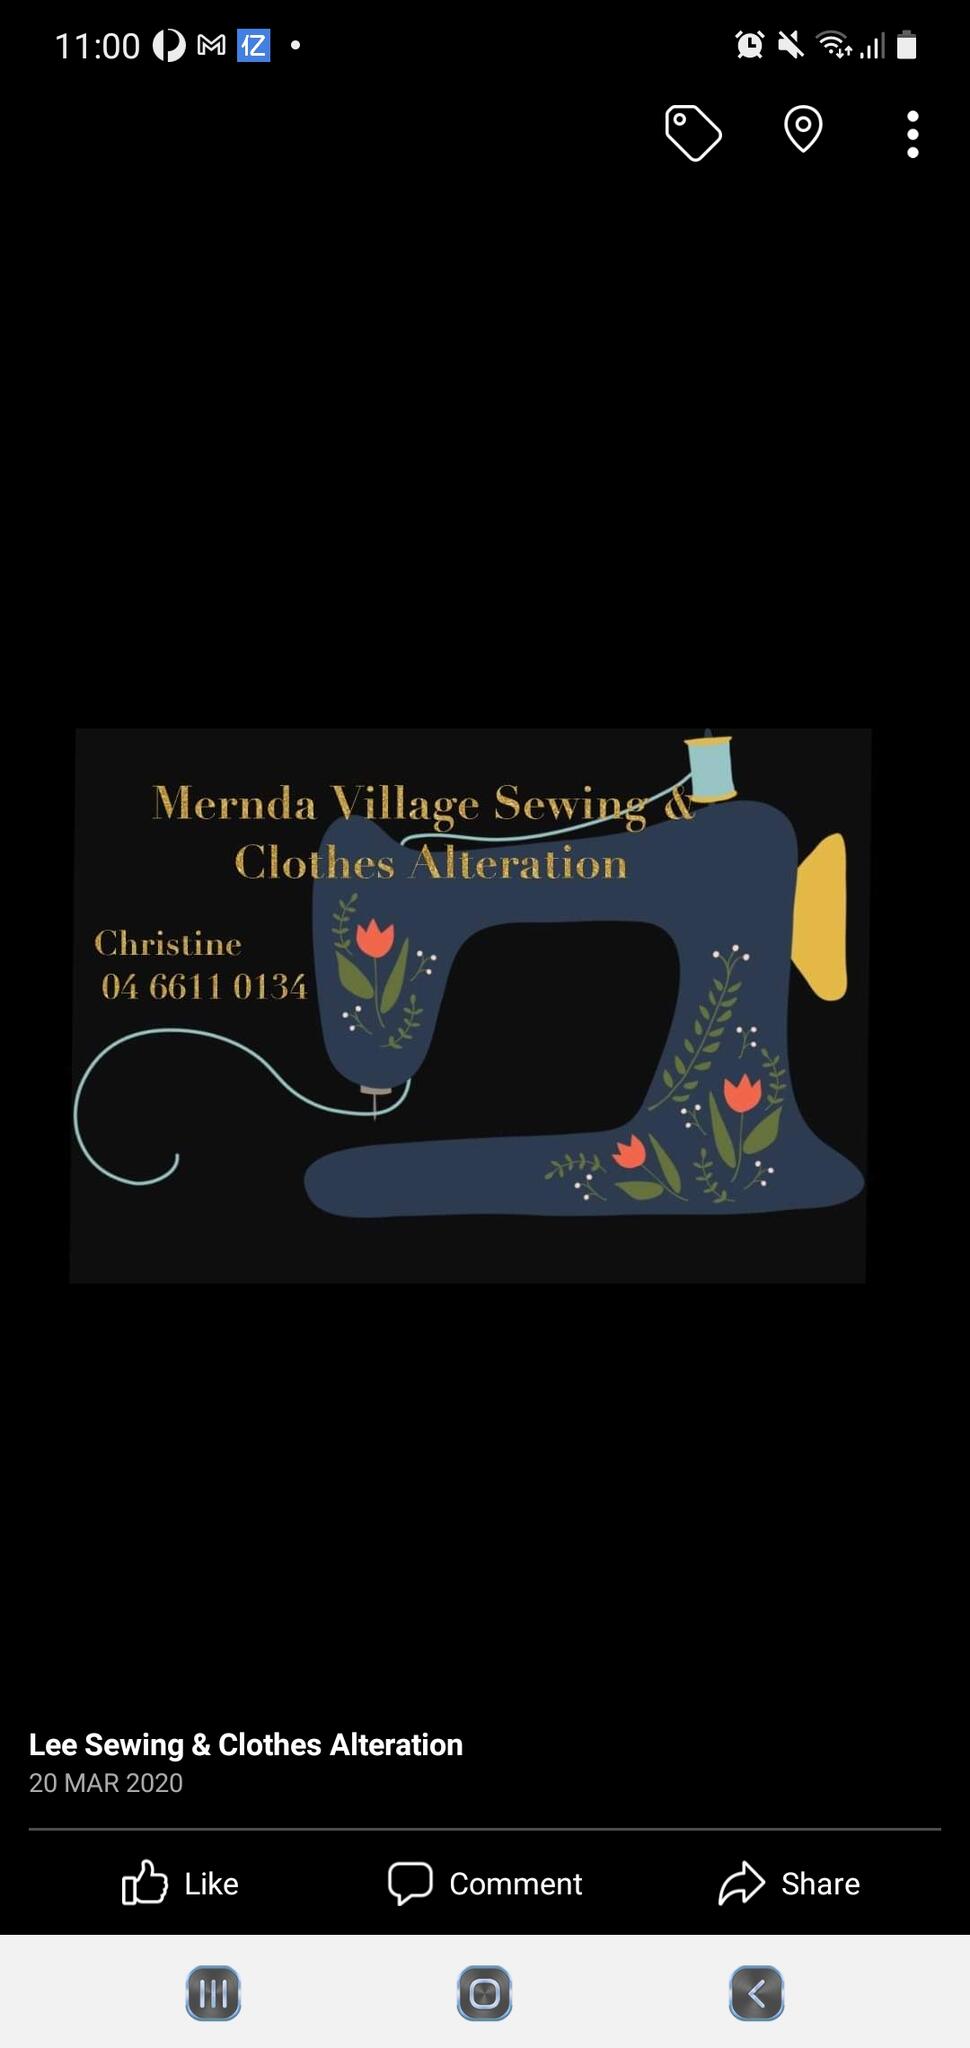 Lee Sewing & Clothes Alterations